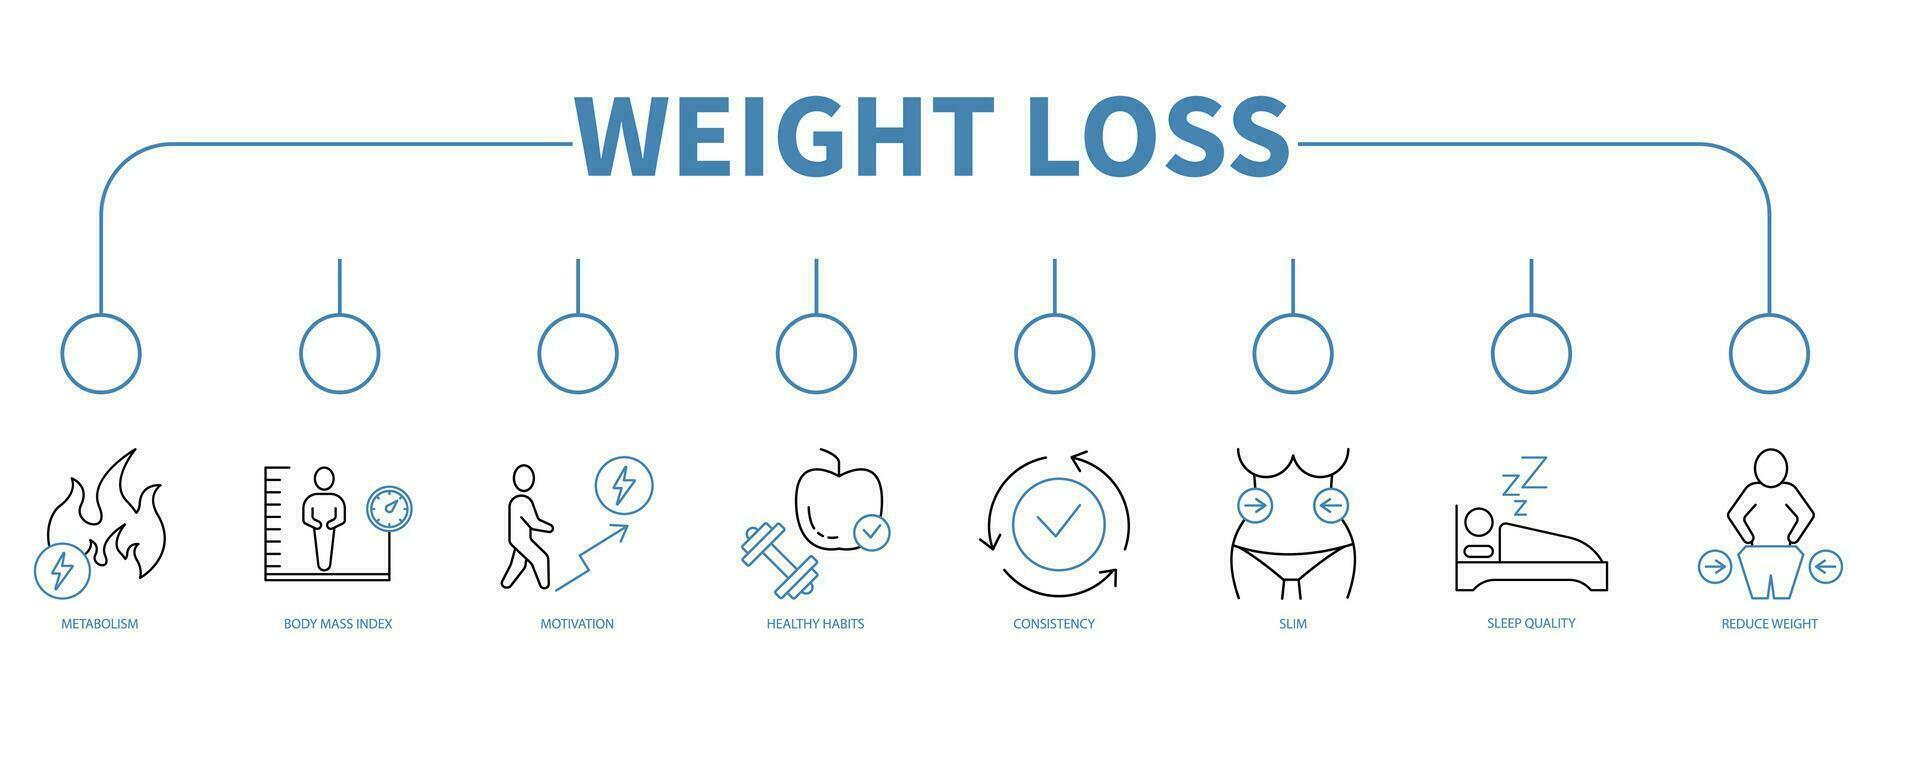 eWeight loss banner web icon vector illustration concept